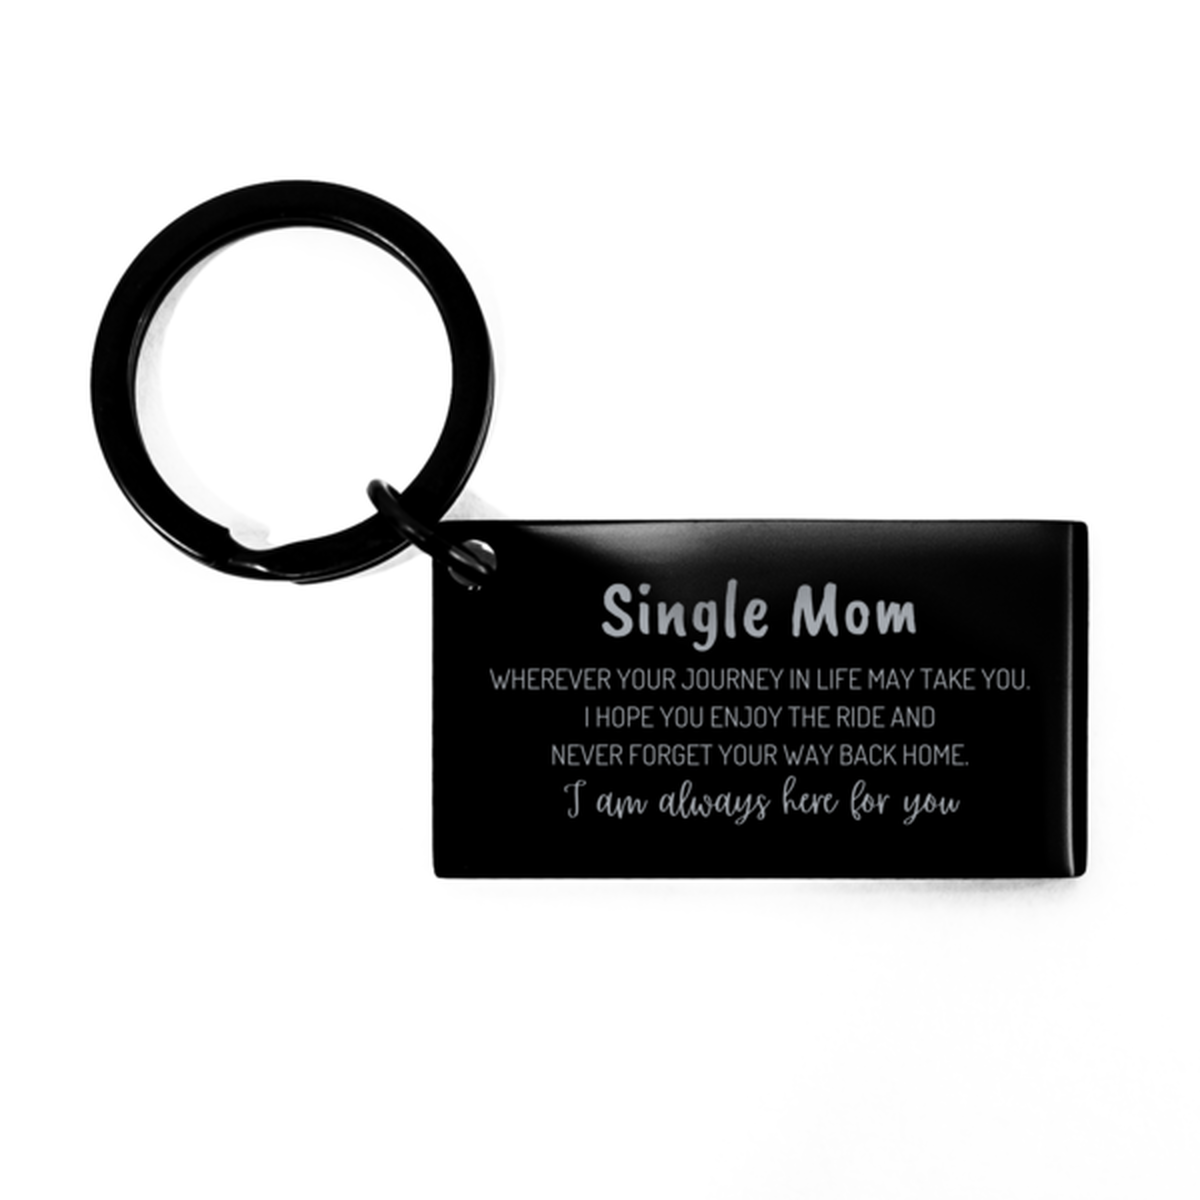 Single Mom wherever your journey in life may take you, I am always here for you Single Mom Keychain, Awesome Christmas Gifts For Single Mom, Single Mom Birthday Gifts for Men Women Family Loved One